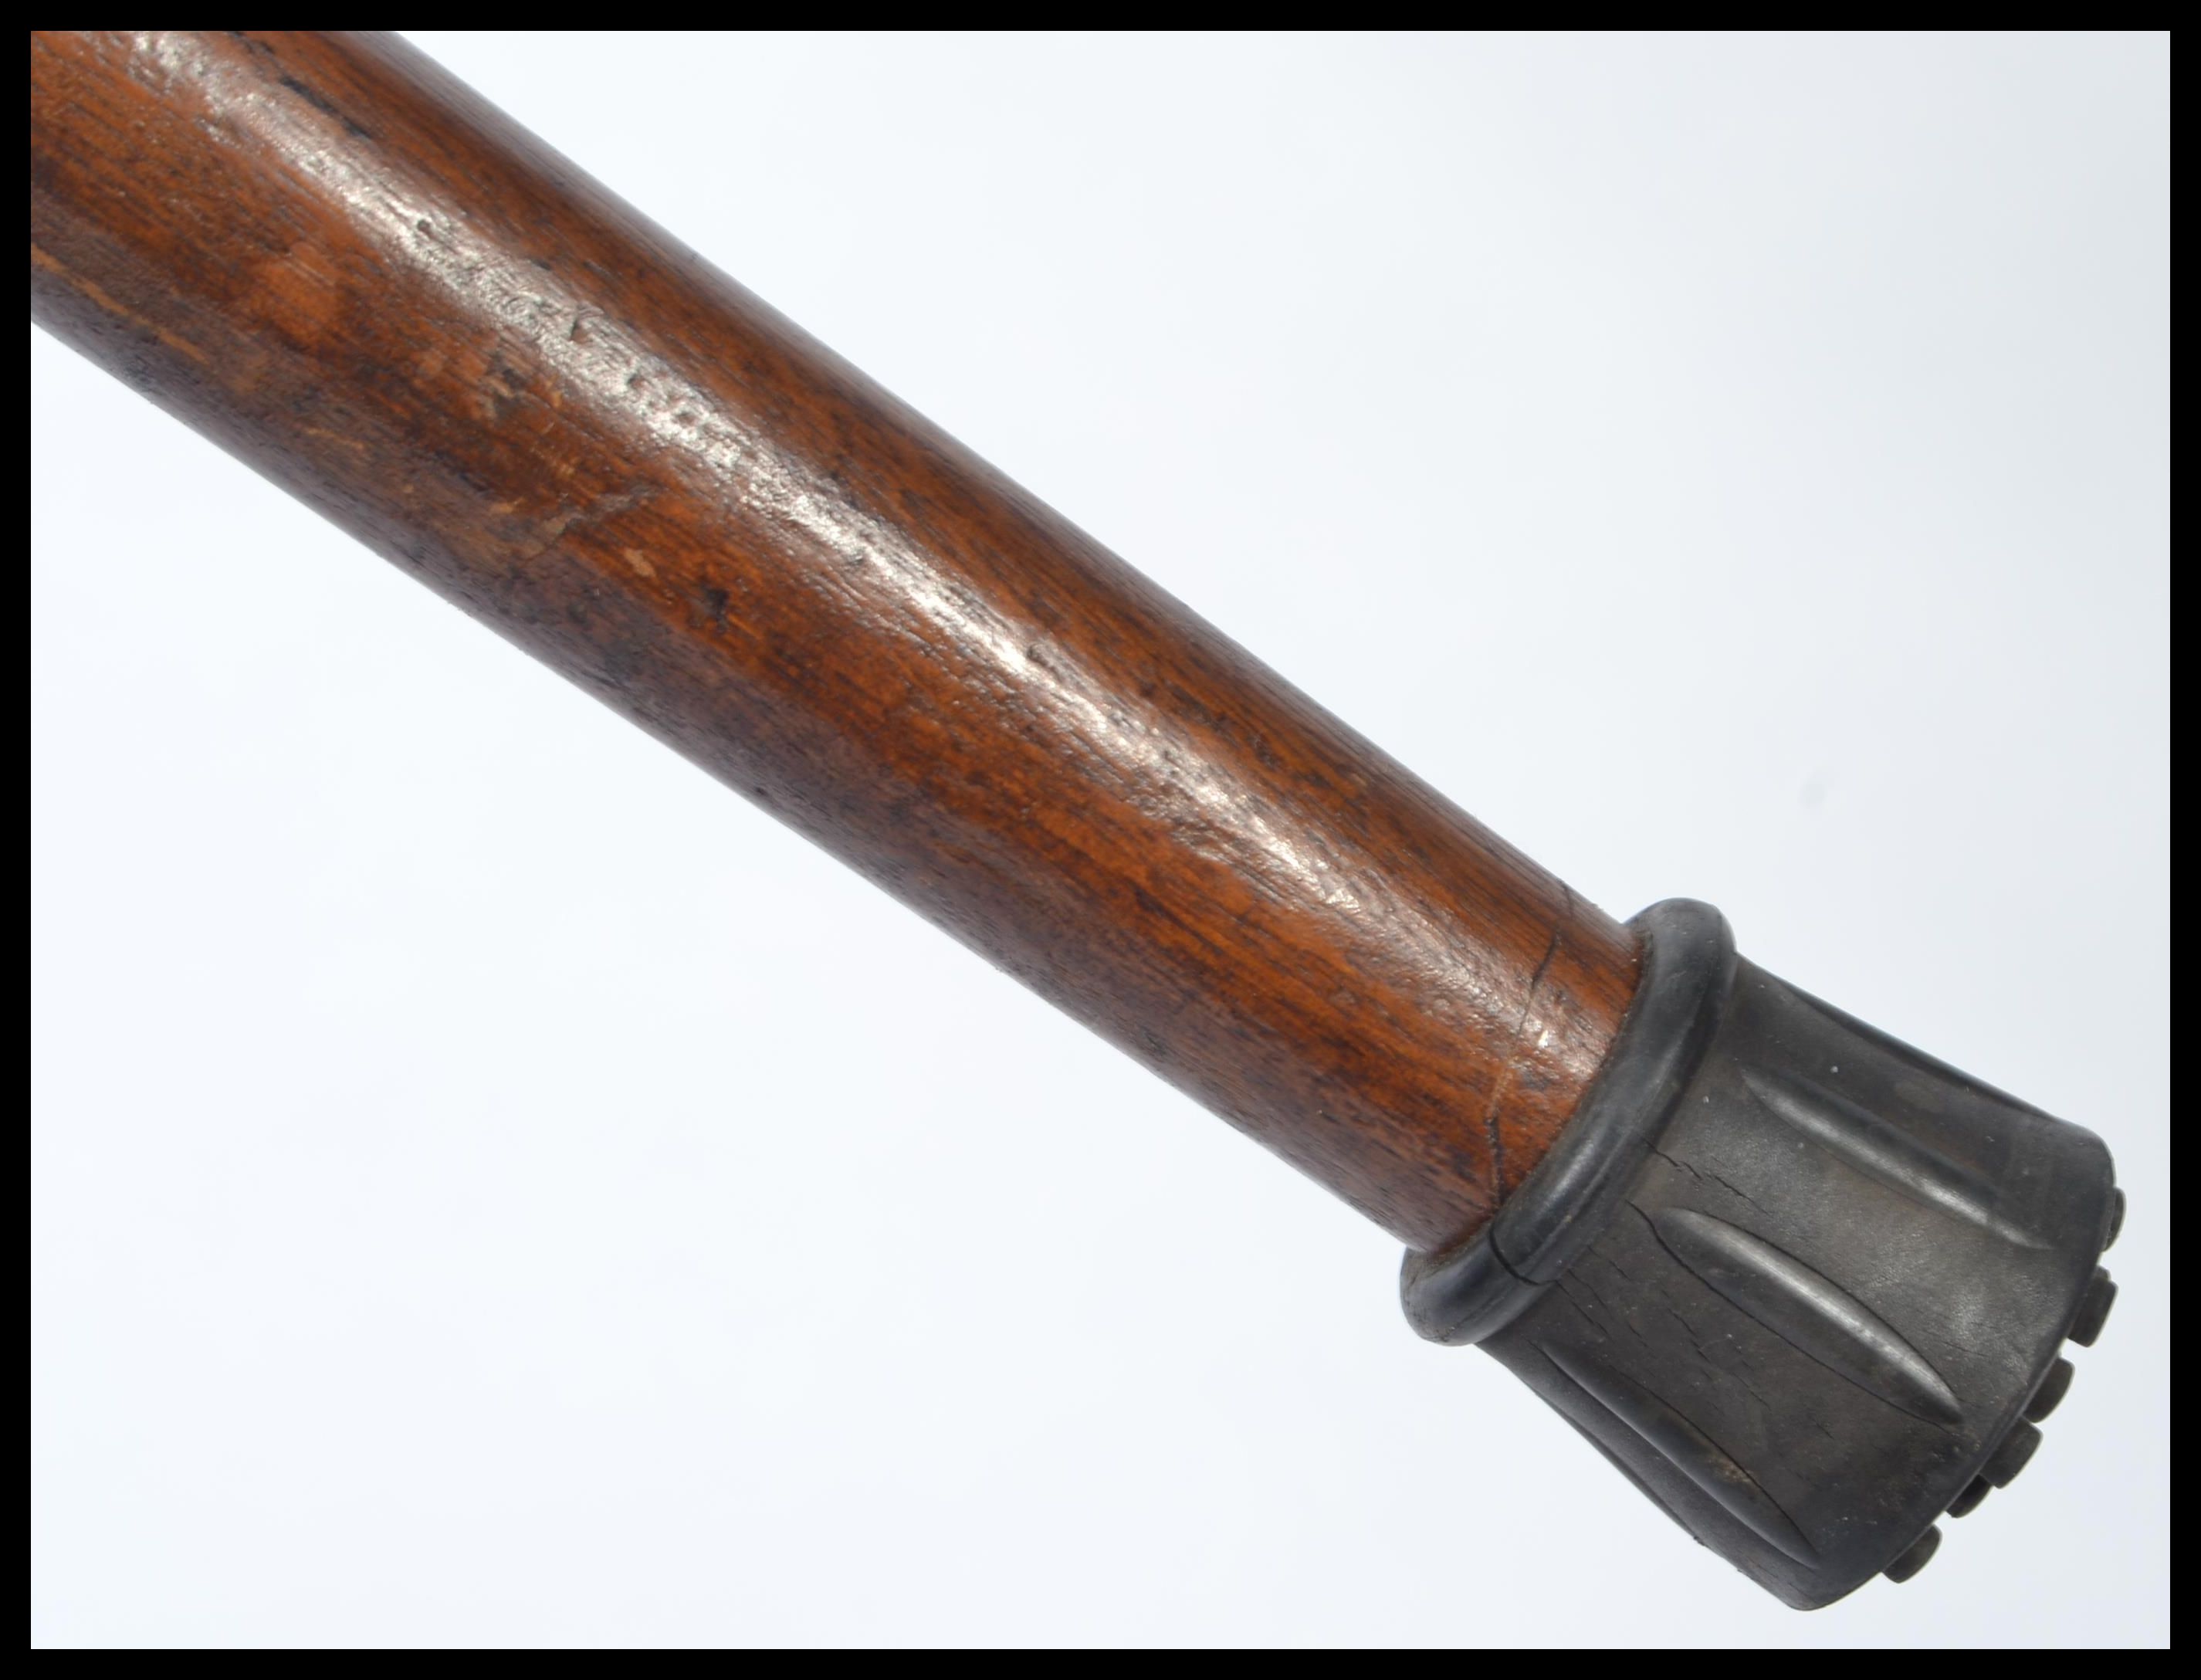 A vintage 20th century walking stick cane having a - Image 6 of 6